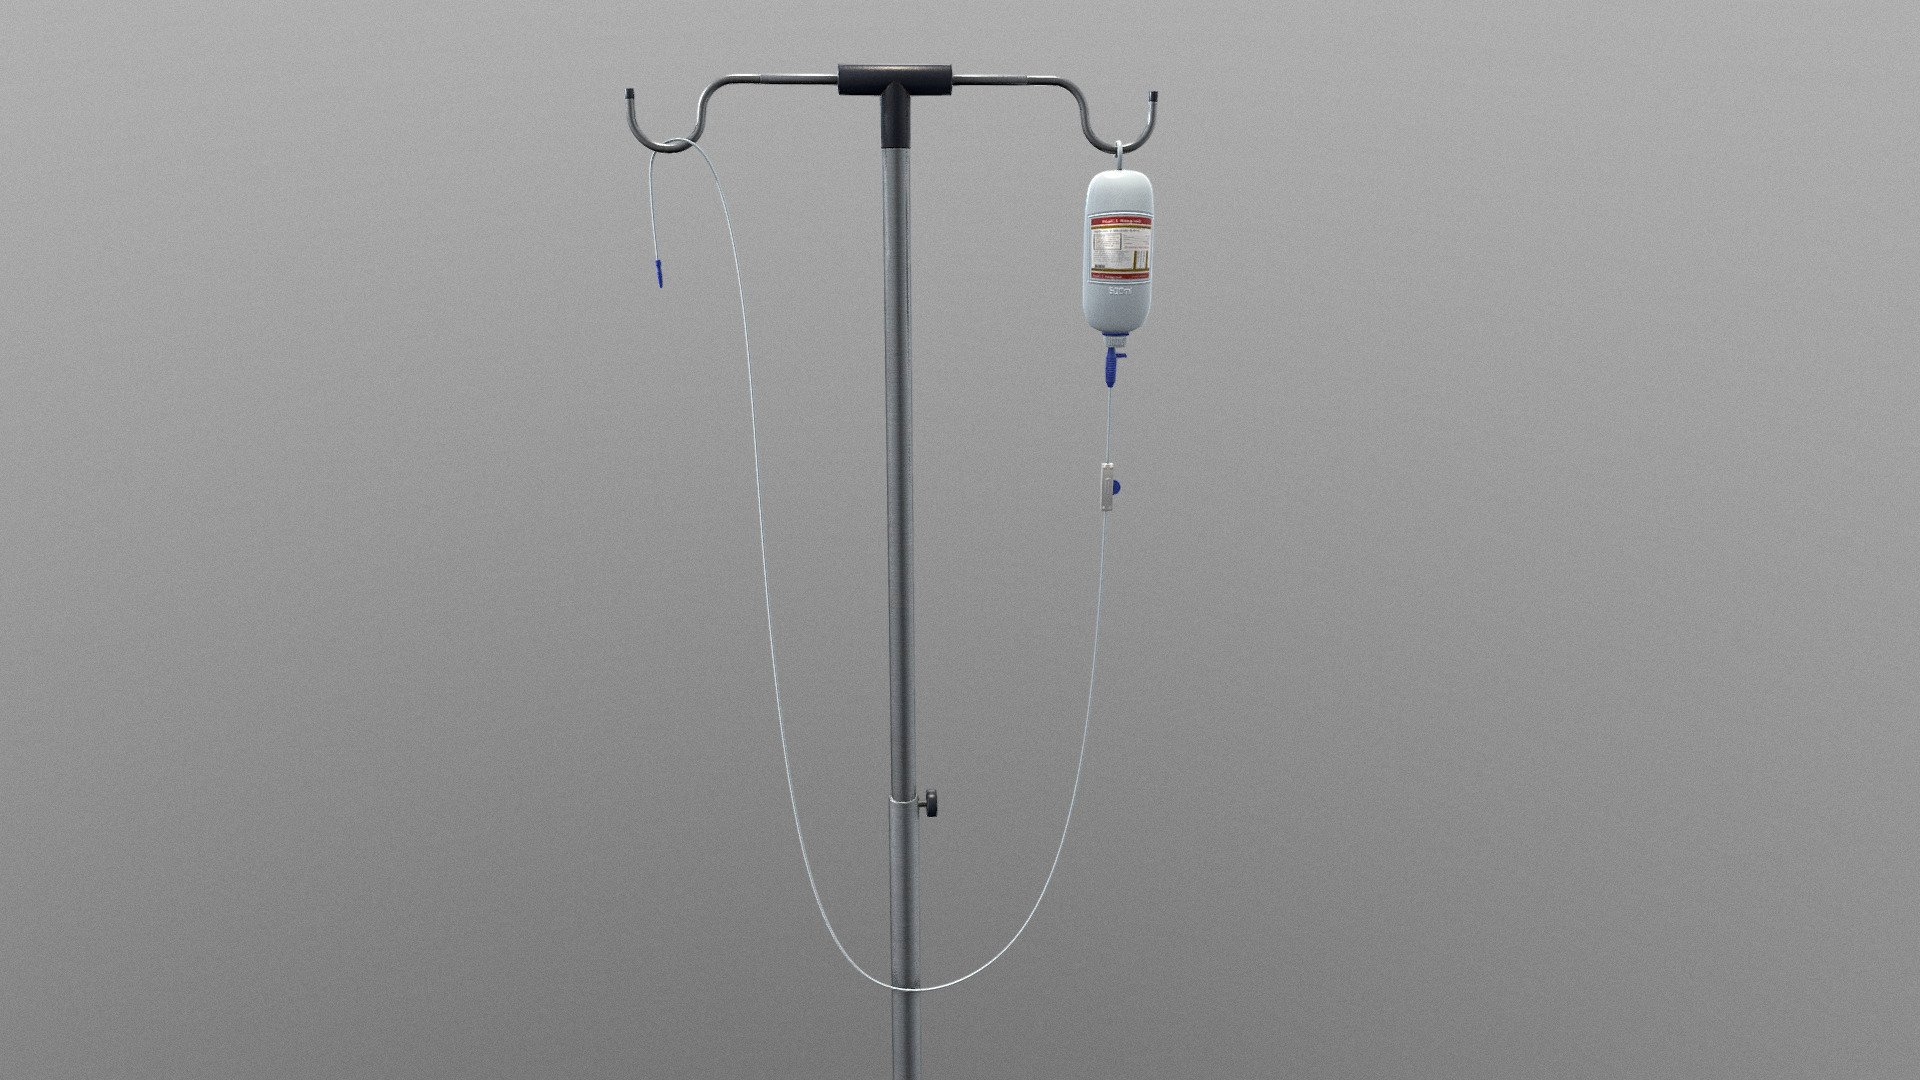 **Hospital Stand Saline 3D model - Low Poly. **
(Real proportions).




The object is a unique mesh and one single material. 

The pivot point is centered at the base of the mesh (0.0.0). 

The topology is quad-based. 

There are no ngos in the mesh. 

All texture file names are prefixed with the object name, followed by the default PBR texture name.

Game Ready. 

There is a zip file with .blend, .obj and .fbx and all textures. 

*object was not modeled for a 3d printer.

*If you need any mesh adjustments, let me know 3d model